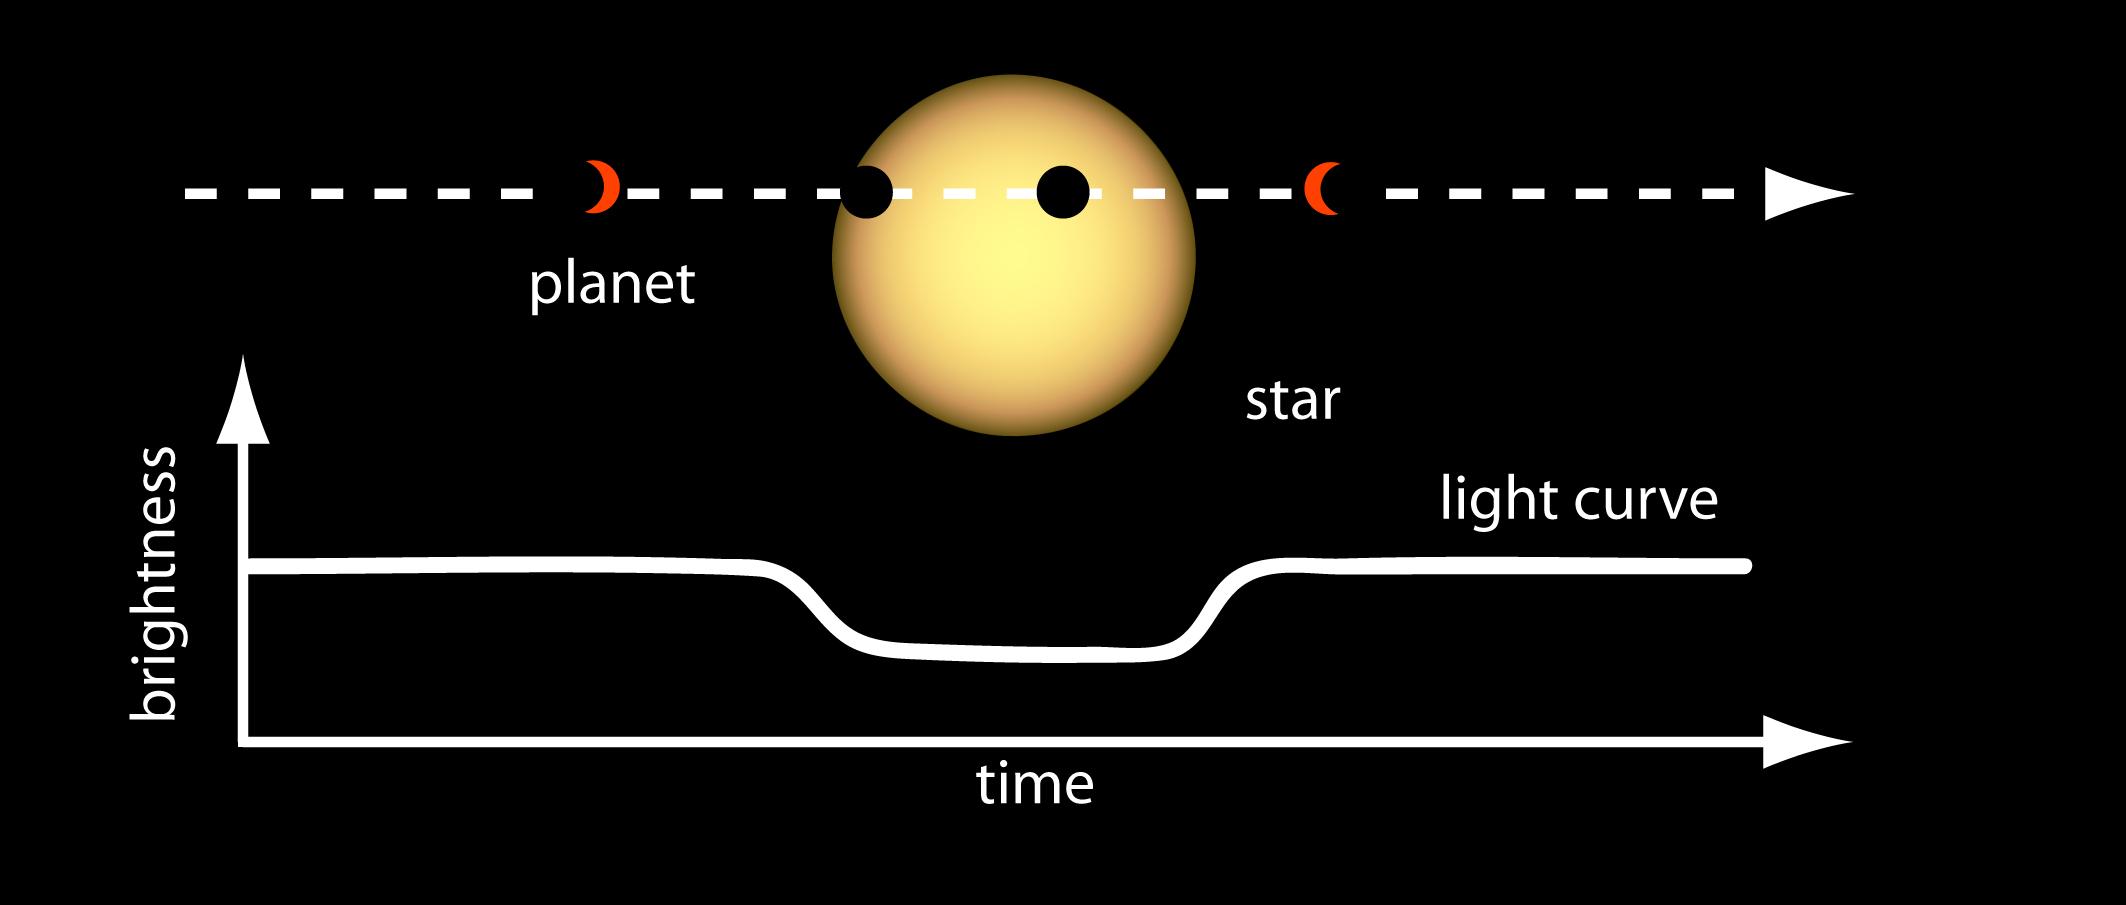 illustration of how transits are used to find exoplanets